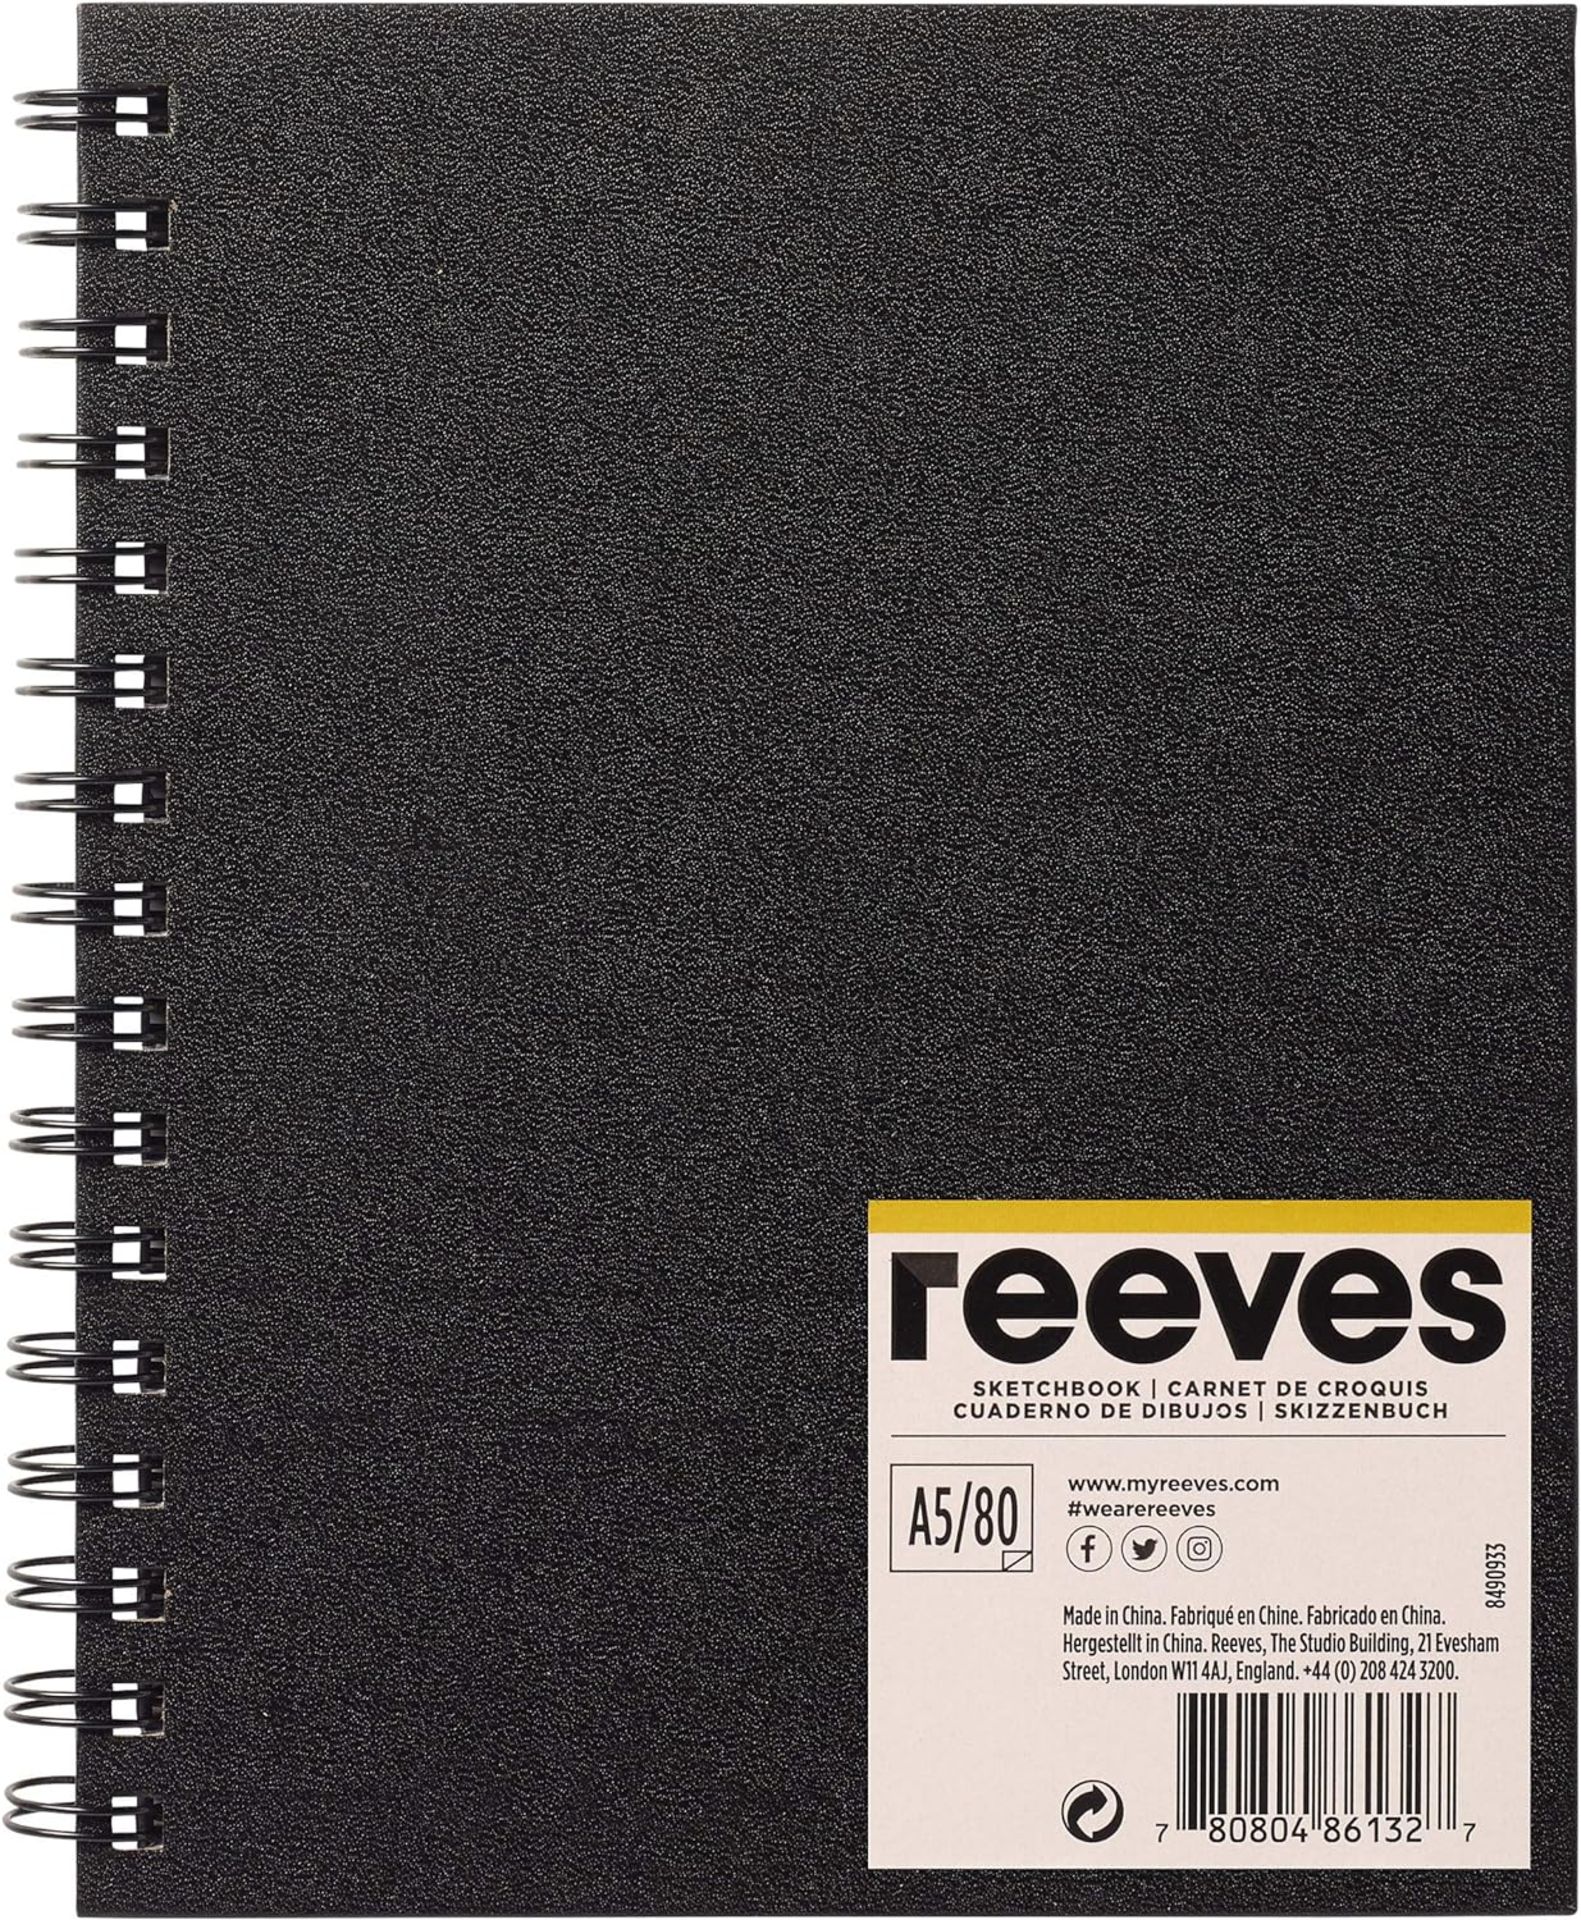 48x BRAND NEW REEVES Hardback Sketchbook A5 Spiral Bound with 80 Pages. RRP £6.29 EACH. (R15- 2).